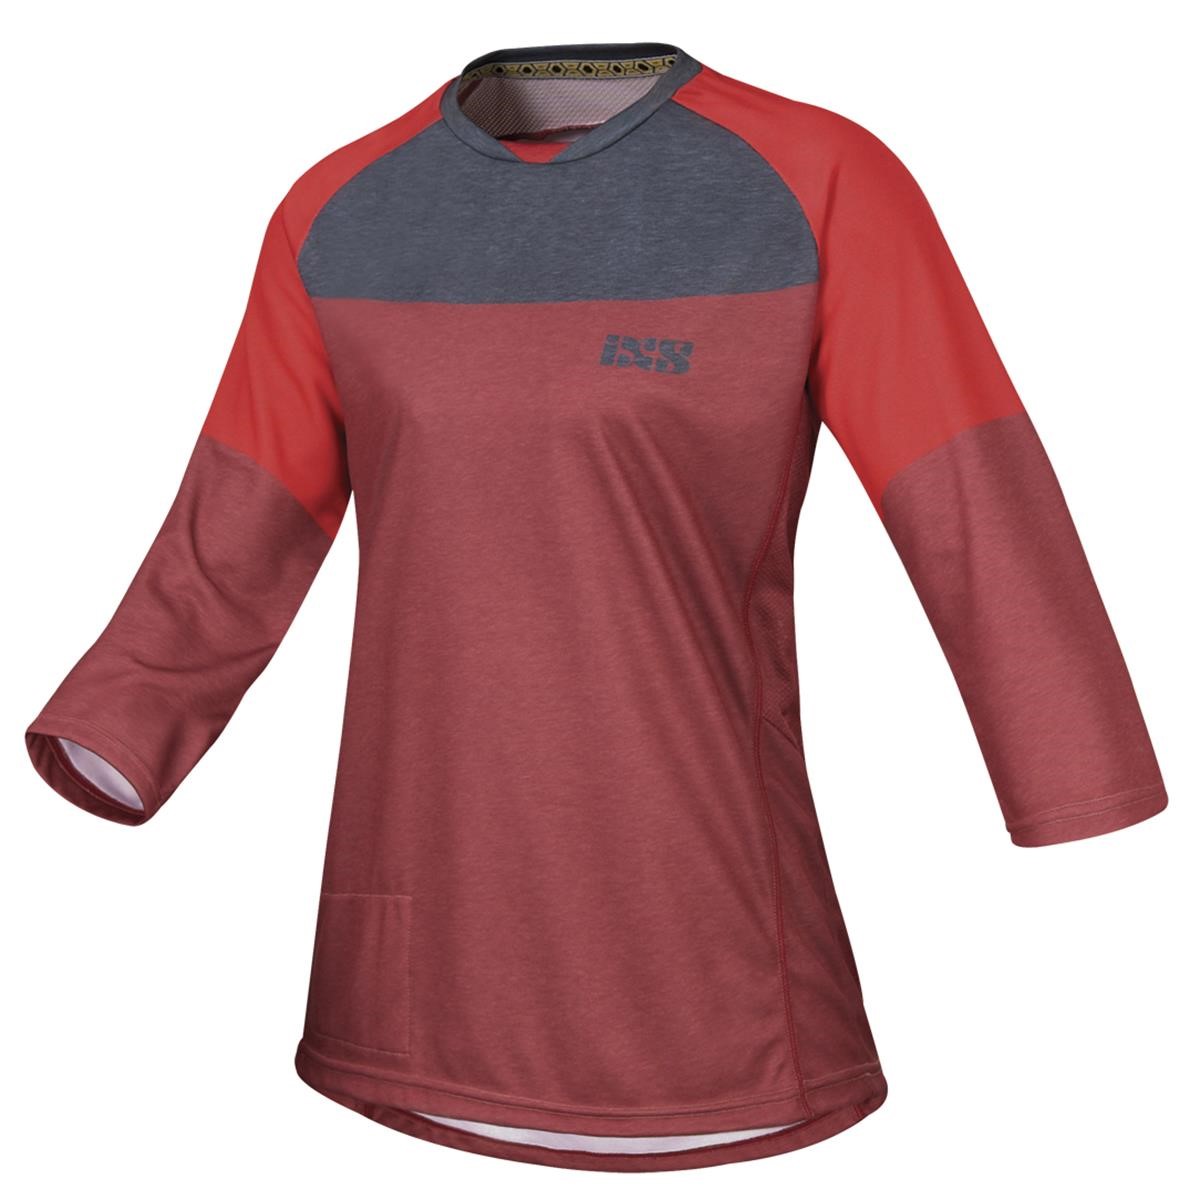 IXS Femme Maillot VTT Manches 3/4 Vibe 6.1 Night Red